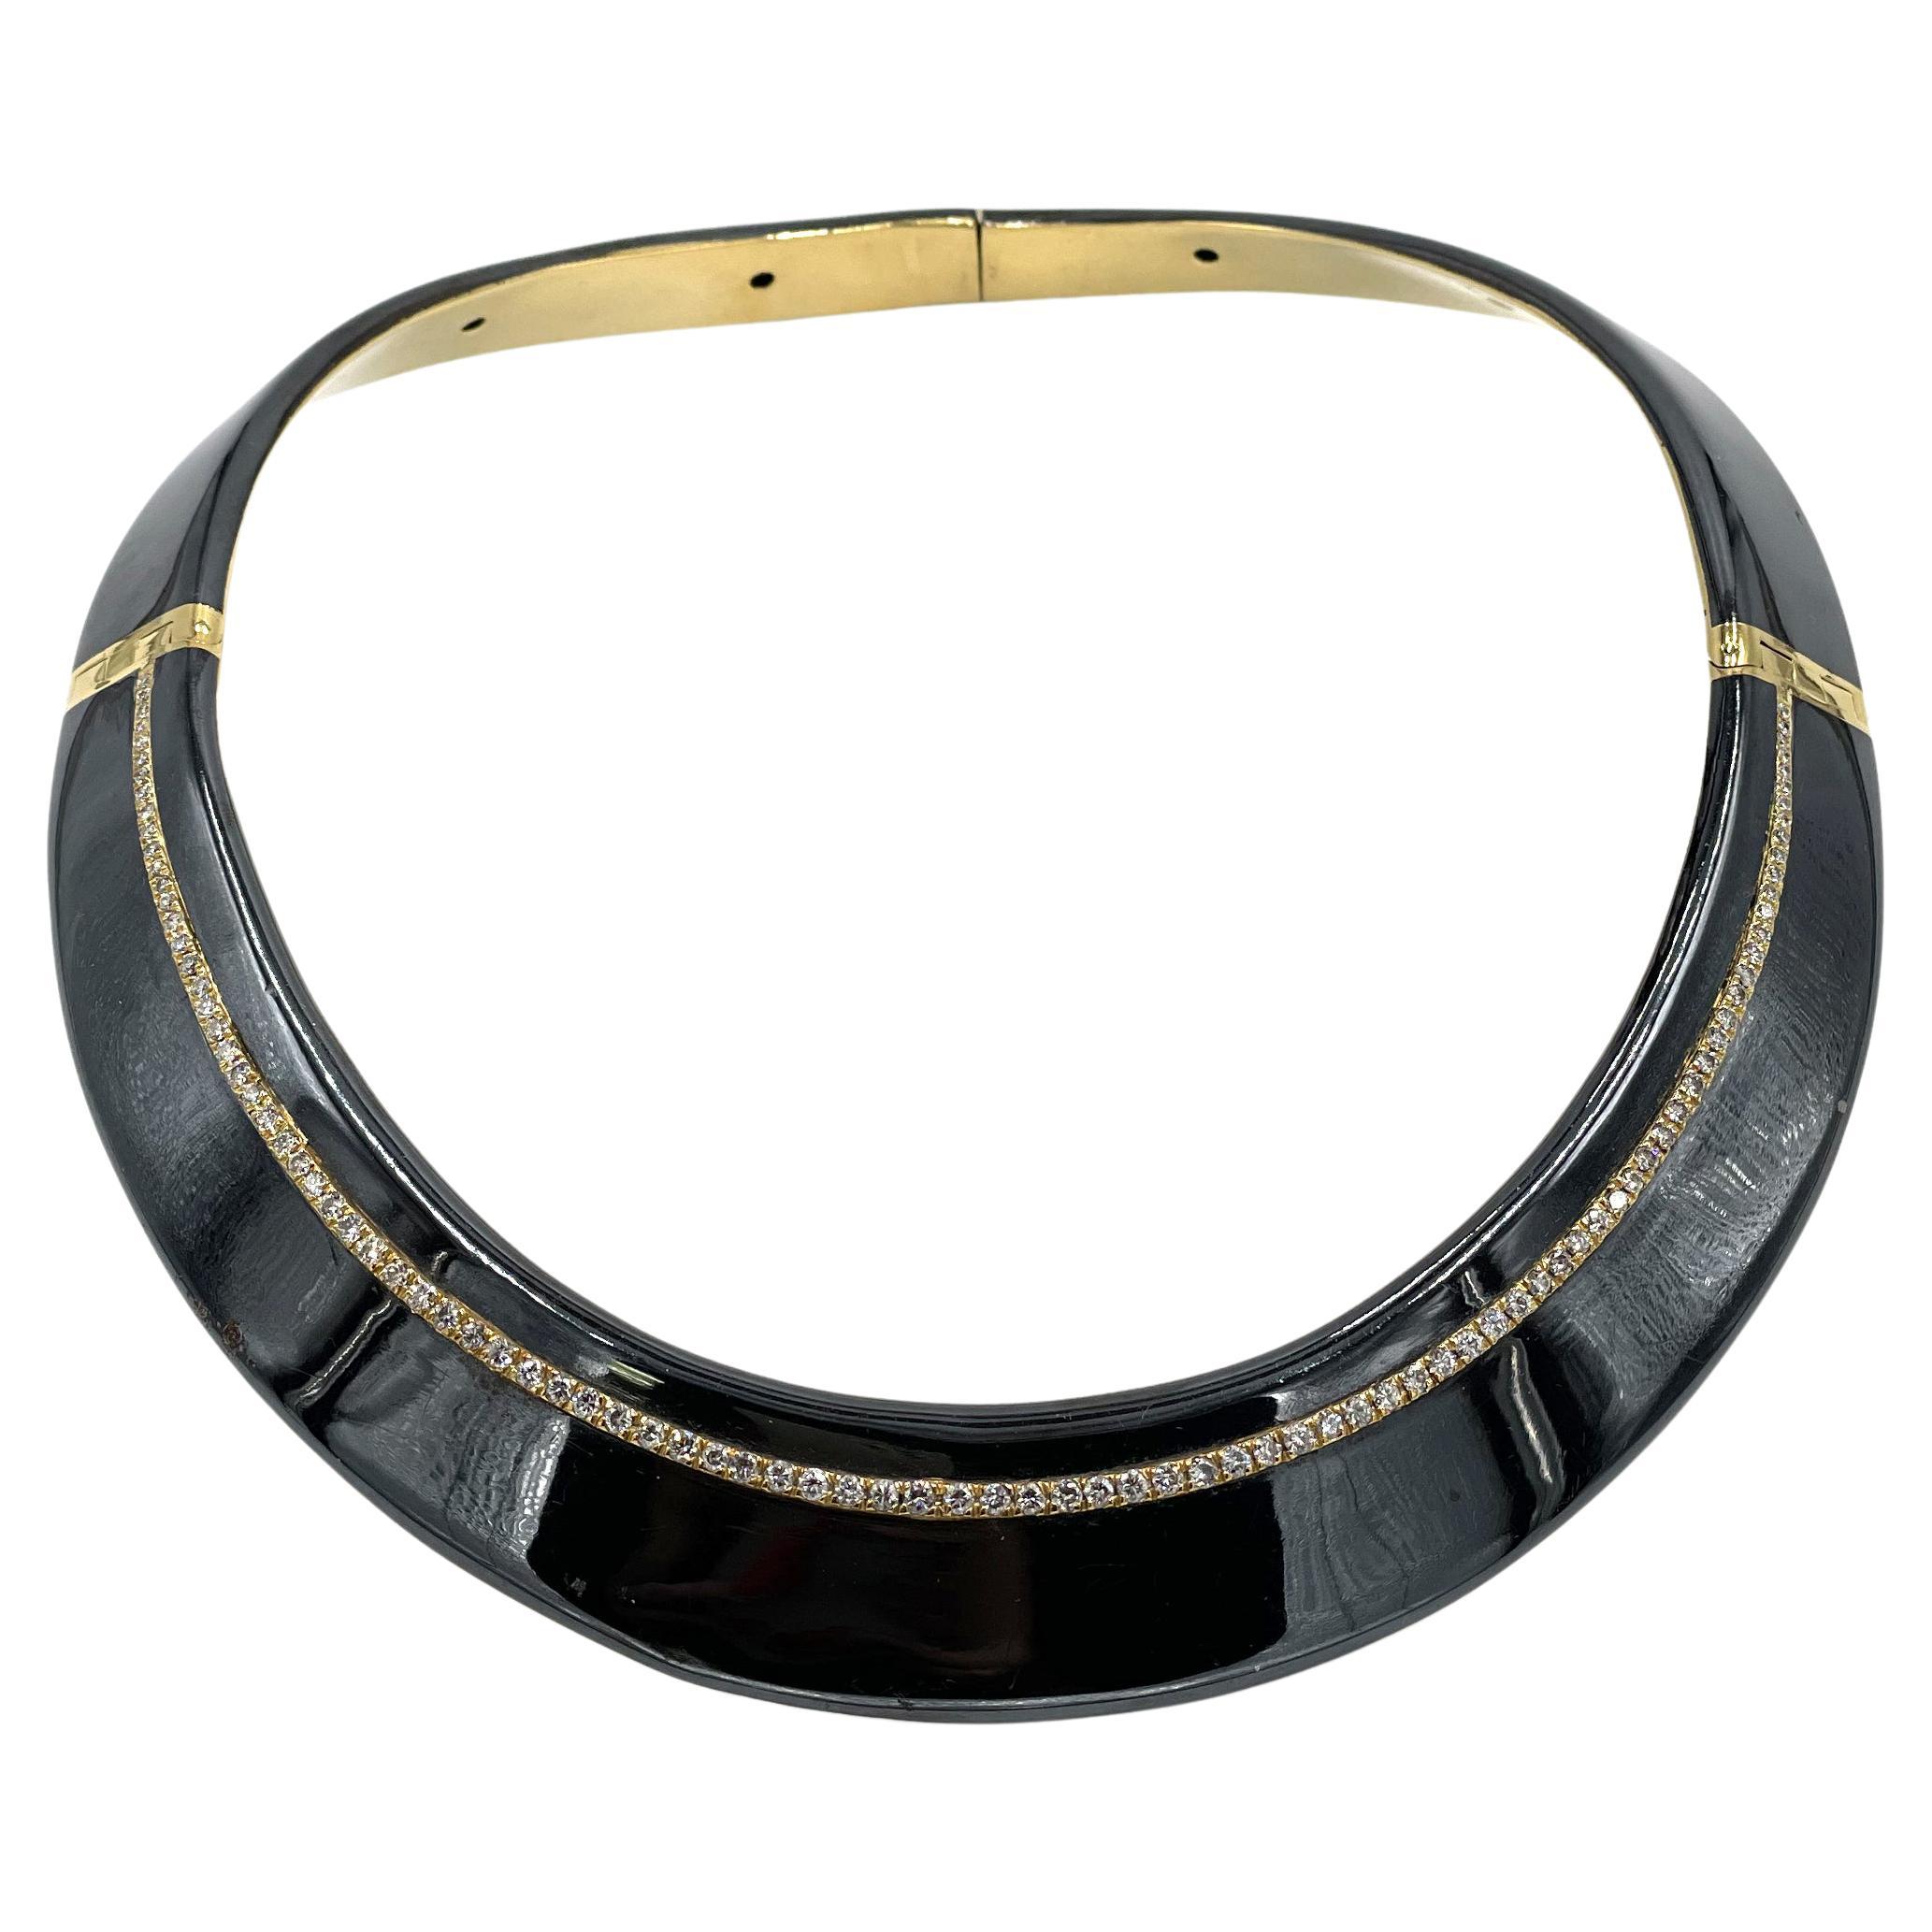 Preowned 18K Yellow Gold Black Enamel and Diamond Collar Necklace